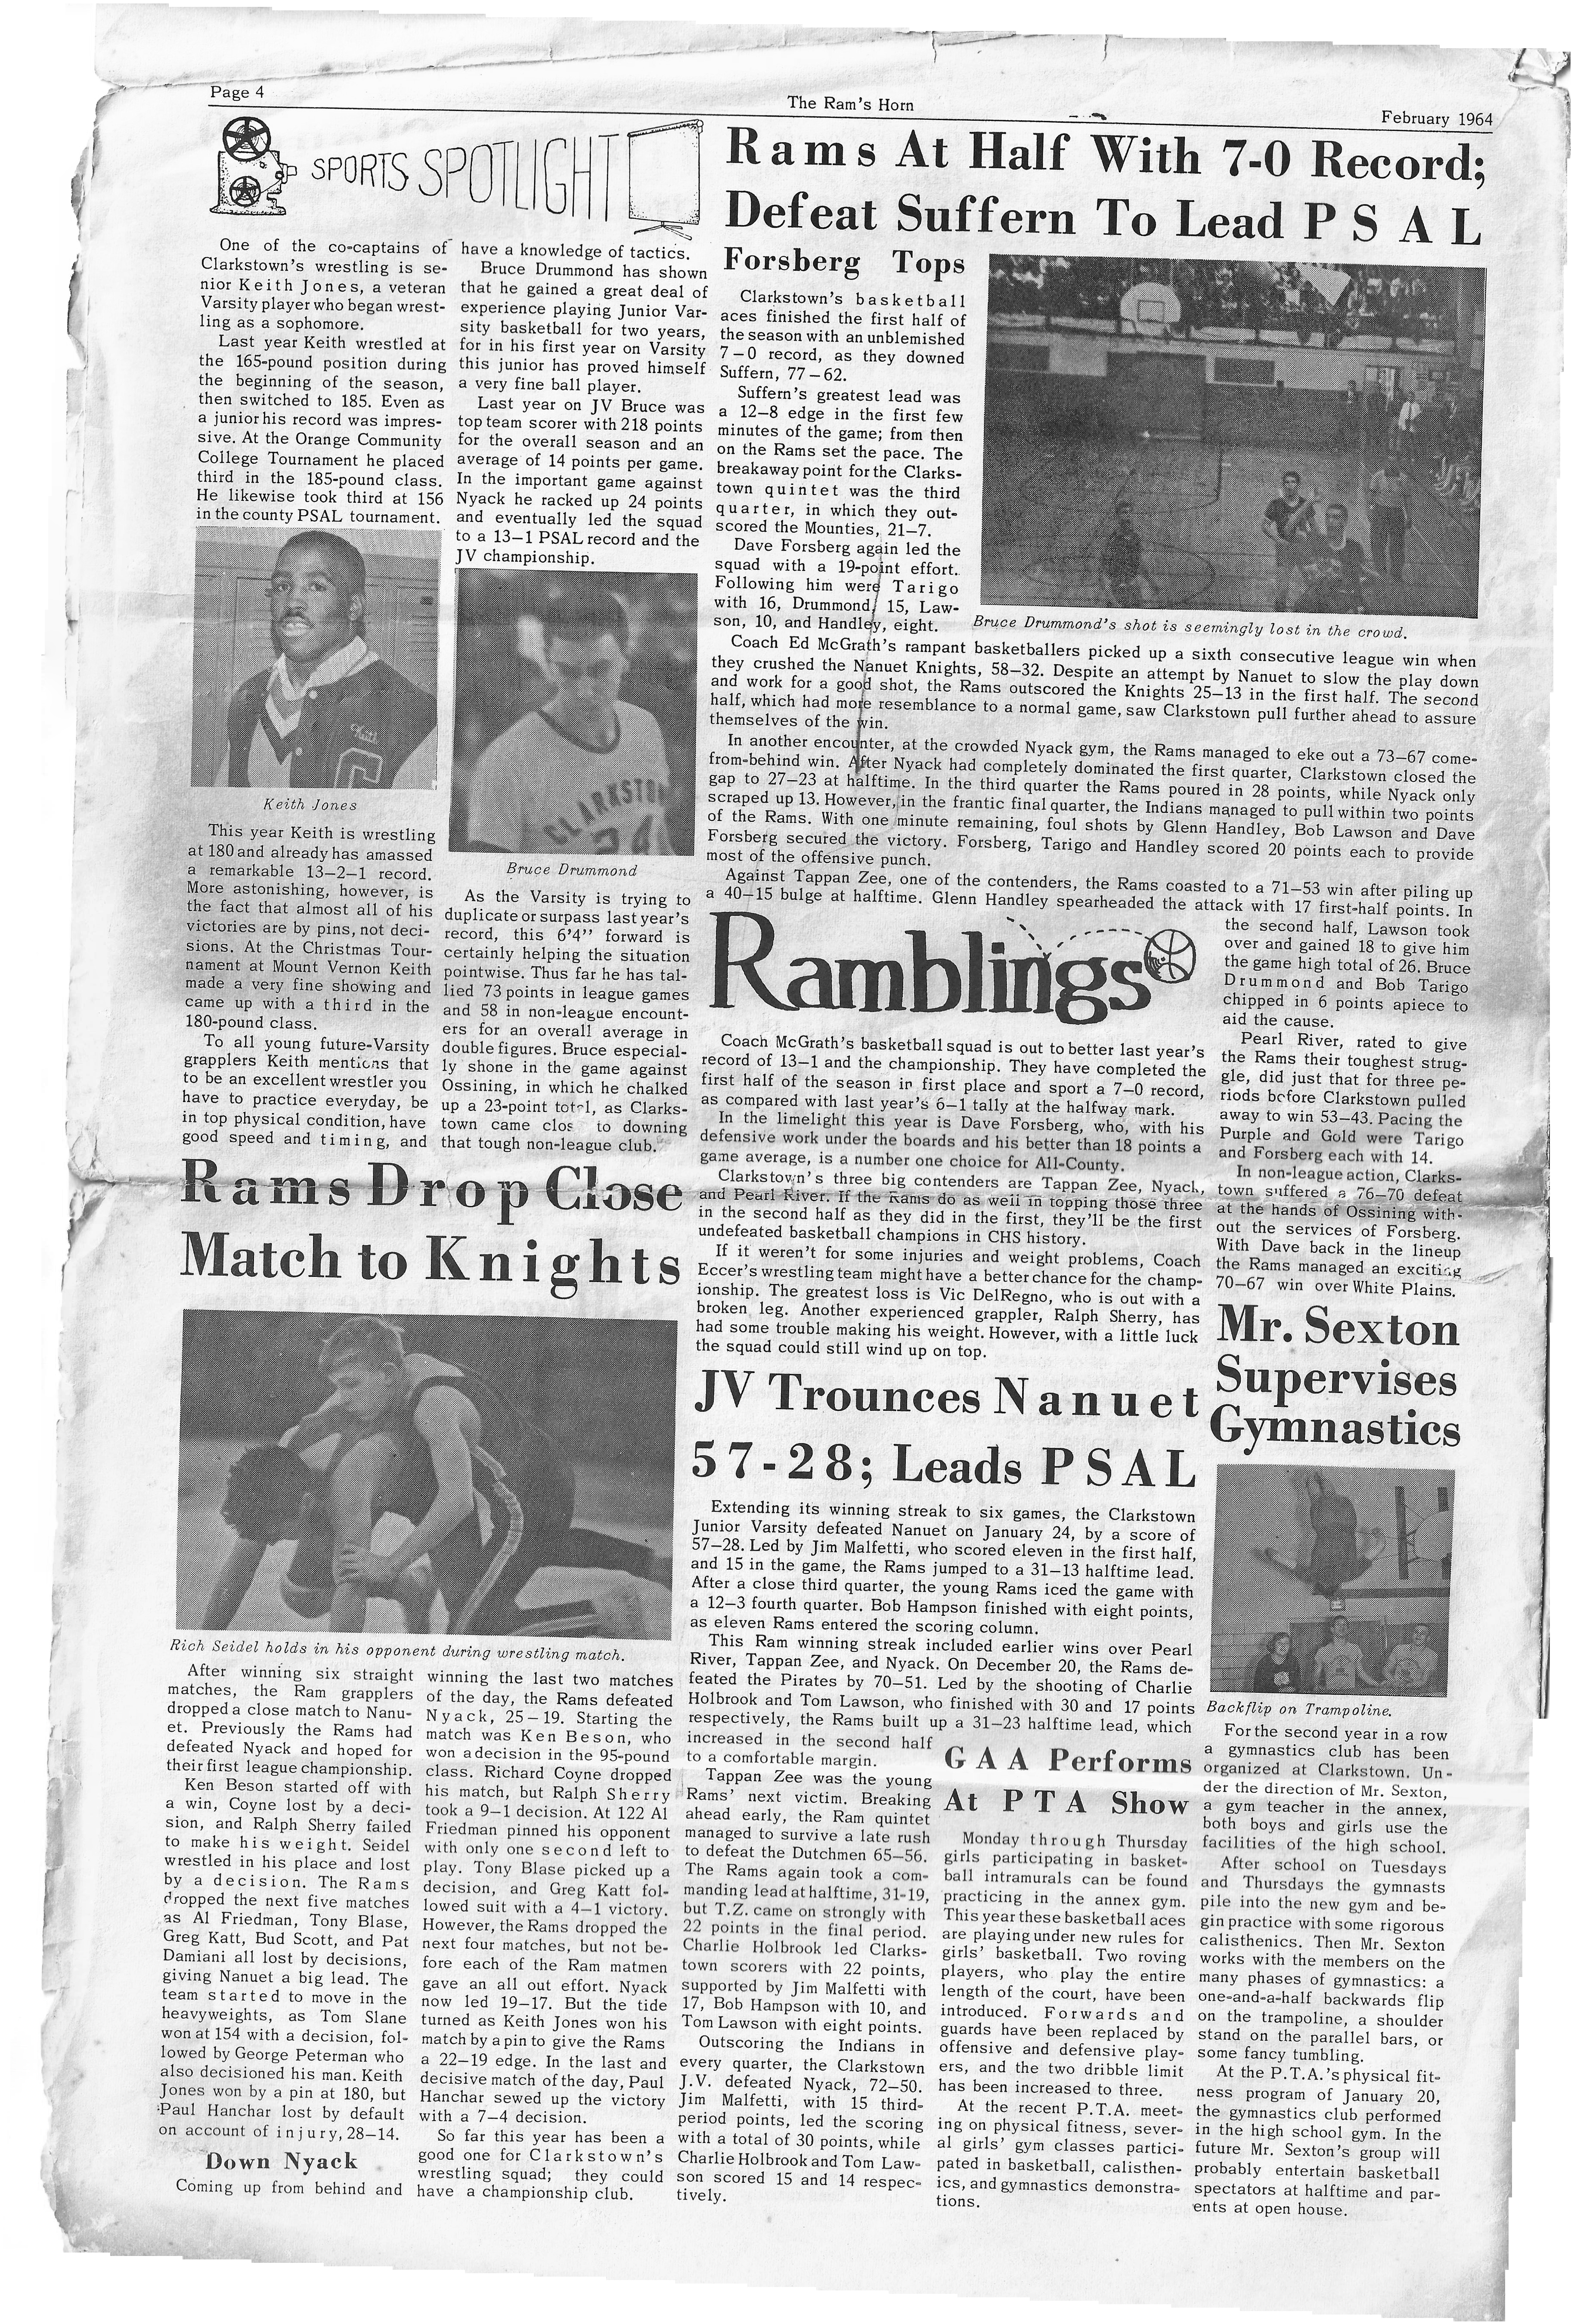 The Ram's Horn - Feb. '64 - Page 4